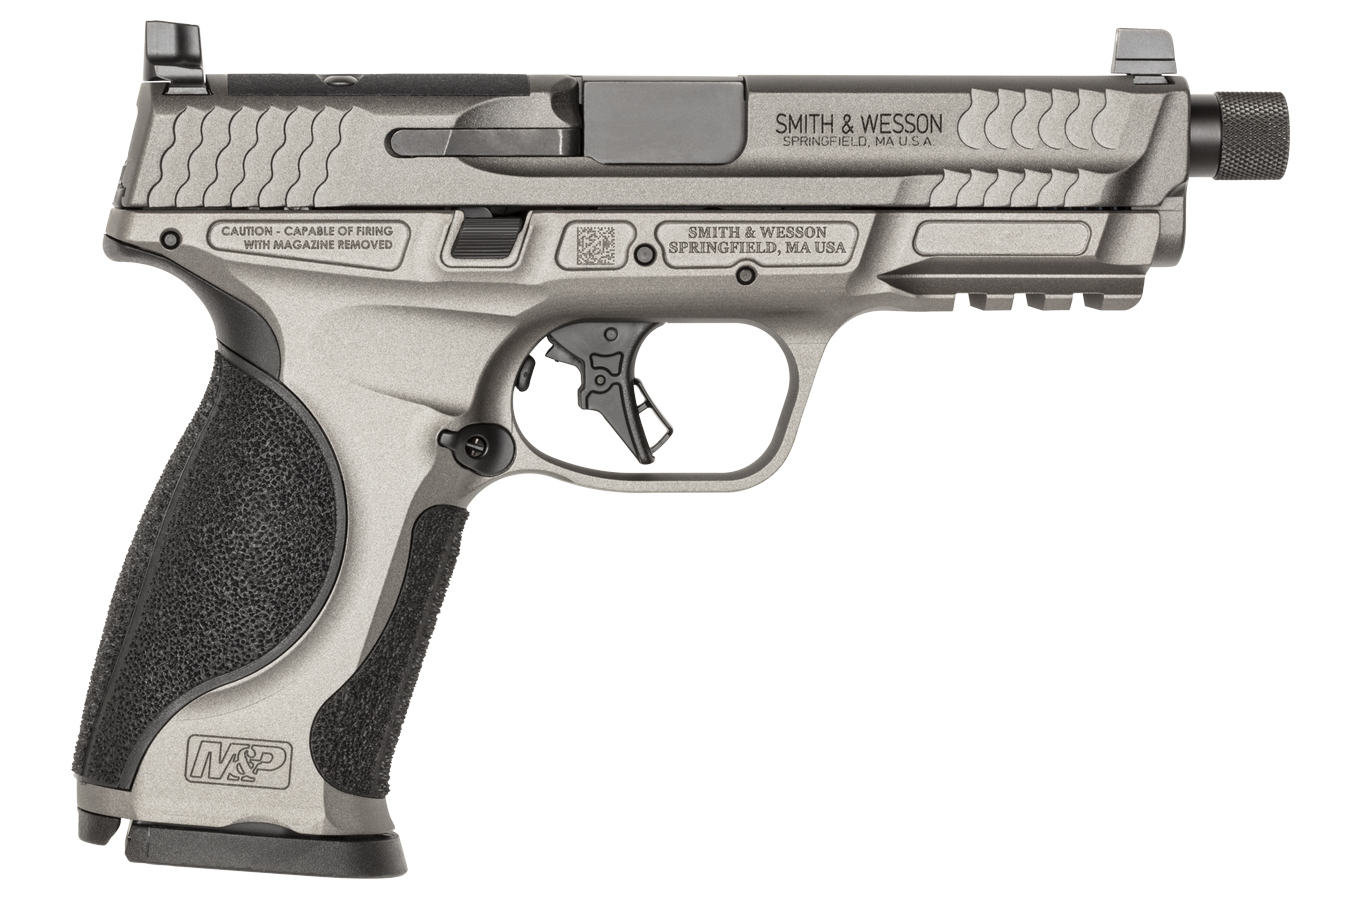 No. 15 Best Selling: SMITH AND WESSON MP 9 M2.0 9MM METAL OR NTS GRAY FINISH 4.625 IN TB 17 RD